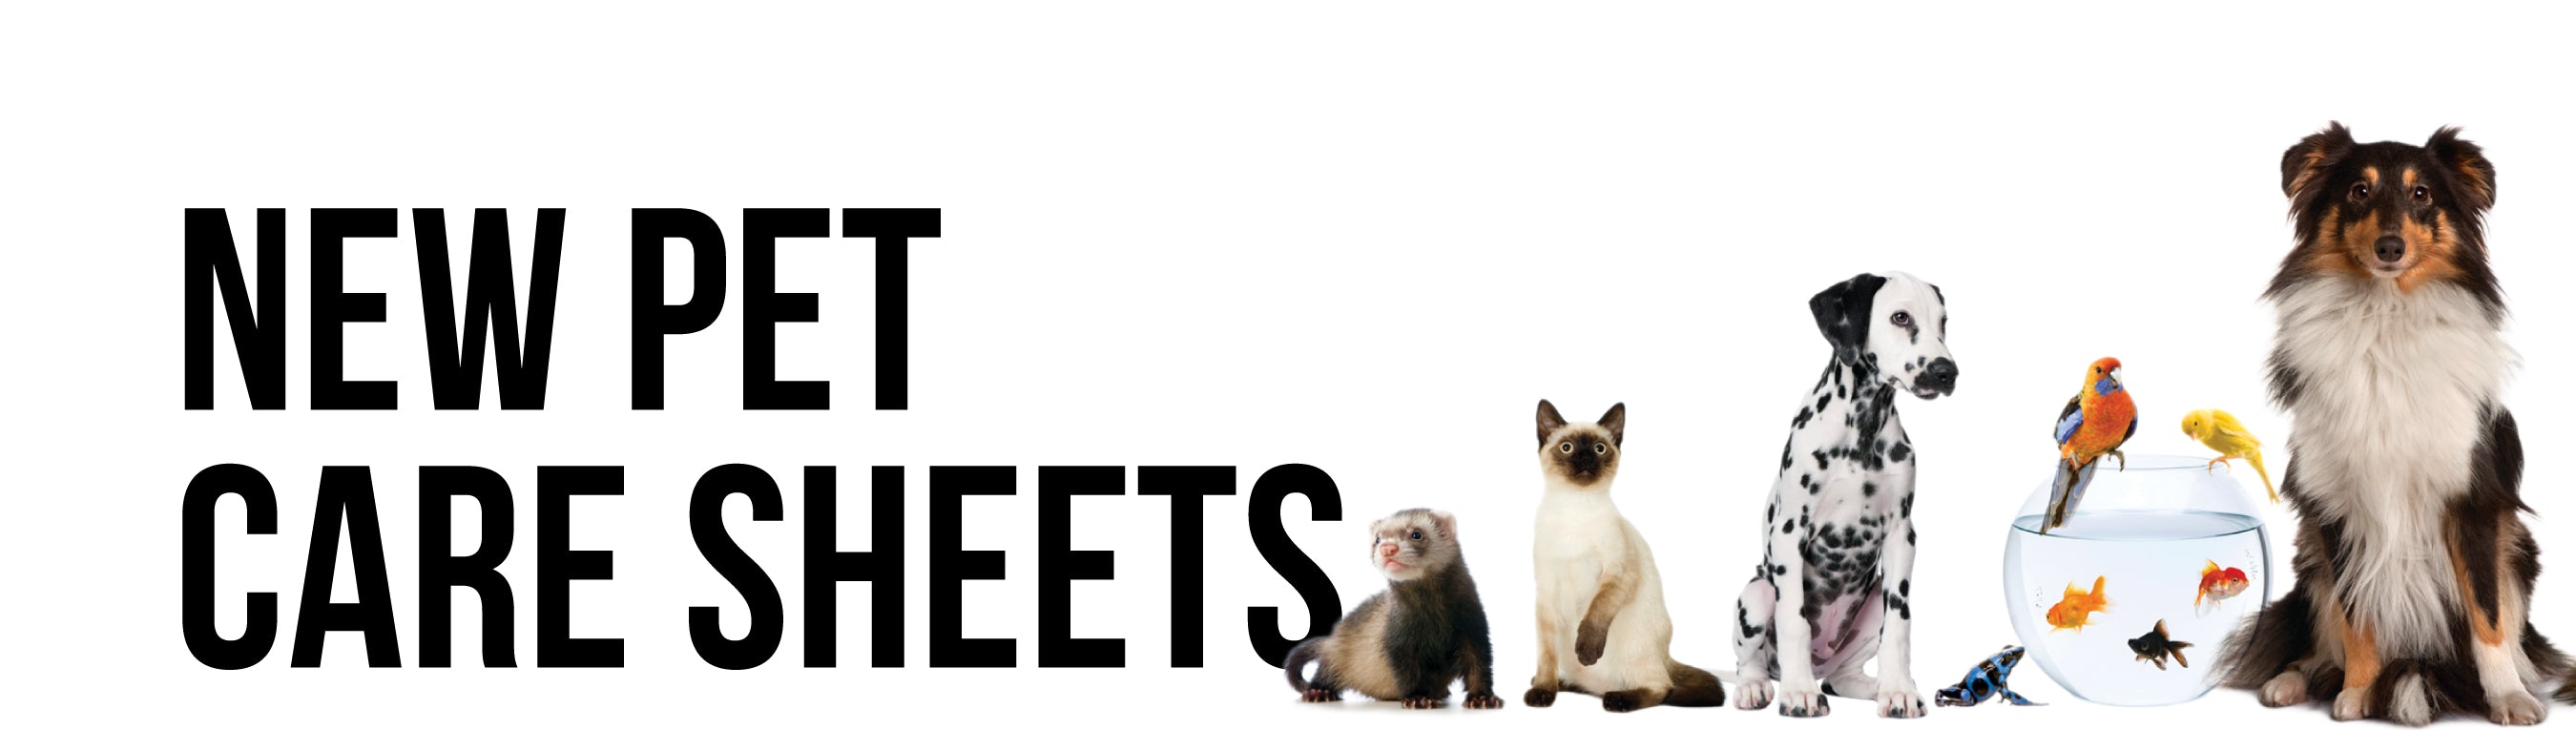 new pet care sheets